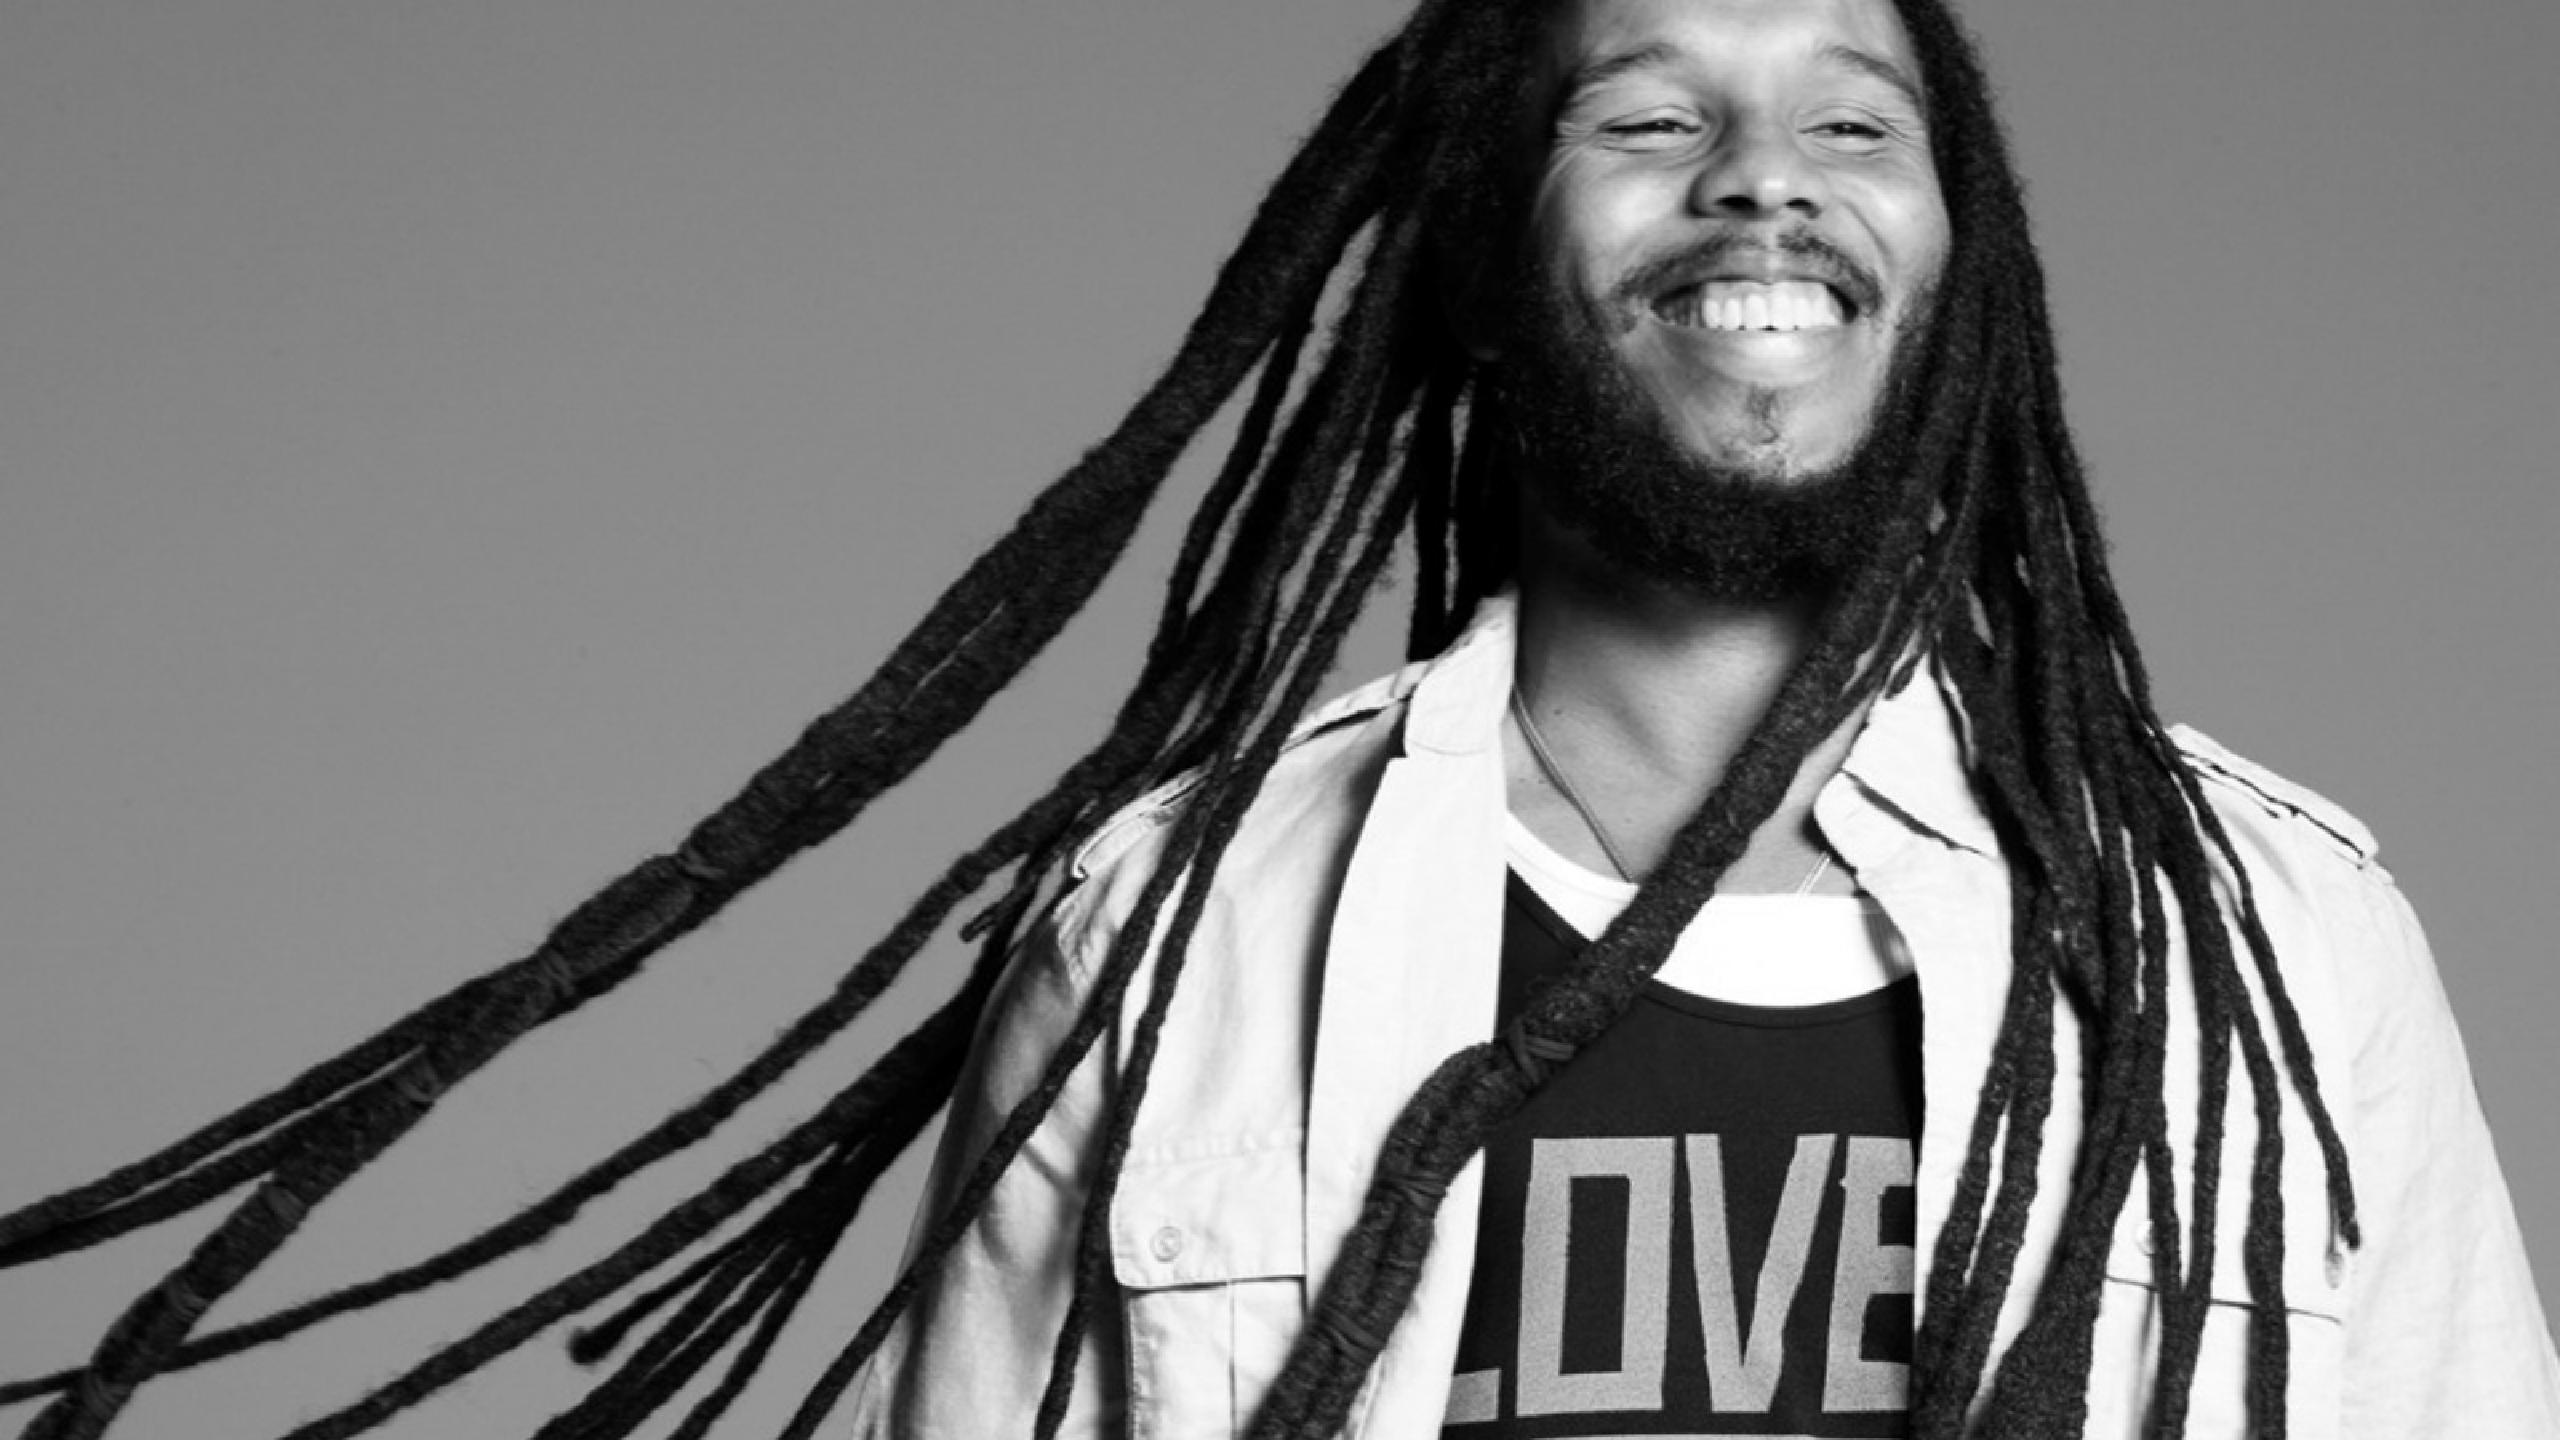 Ziggy Marley tour dates 2022 2023. Ziggy Marley tickets and concerts